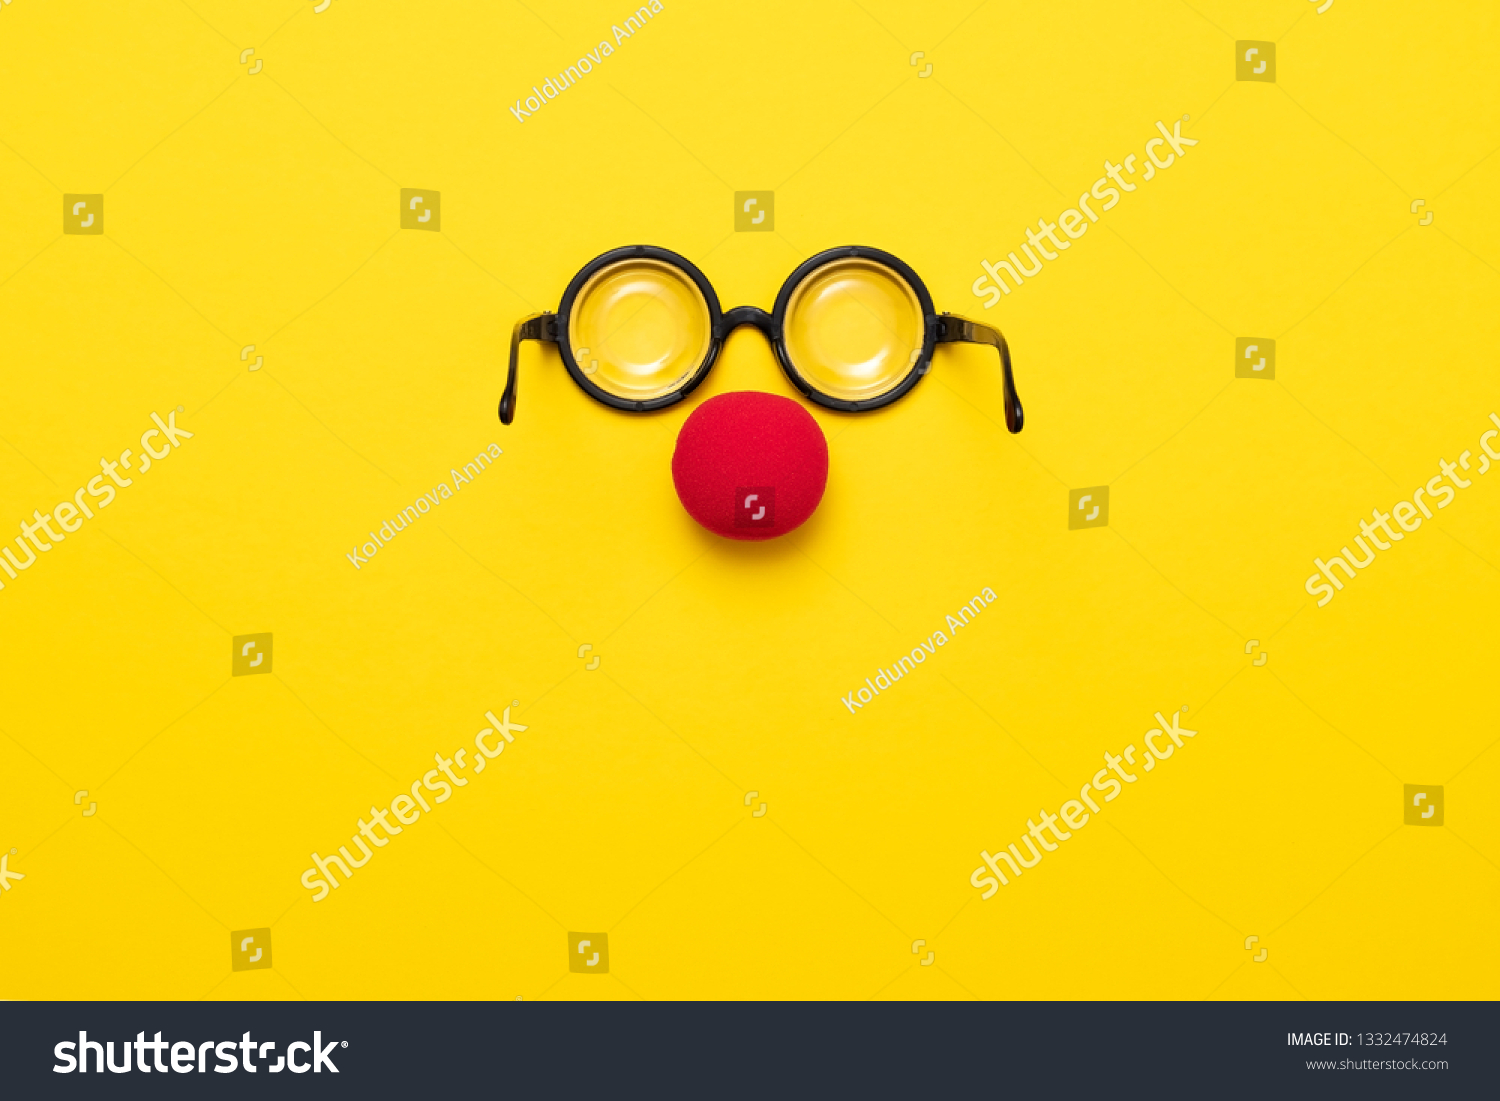 Funny glasses, a red clown nose and tie on a colored background, like a face. Flat lay. Funny costume for the holidays. Anonymous concept. #1332474824